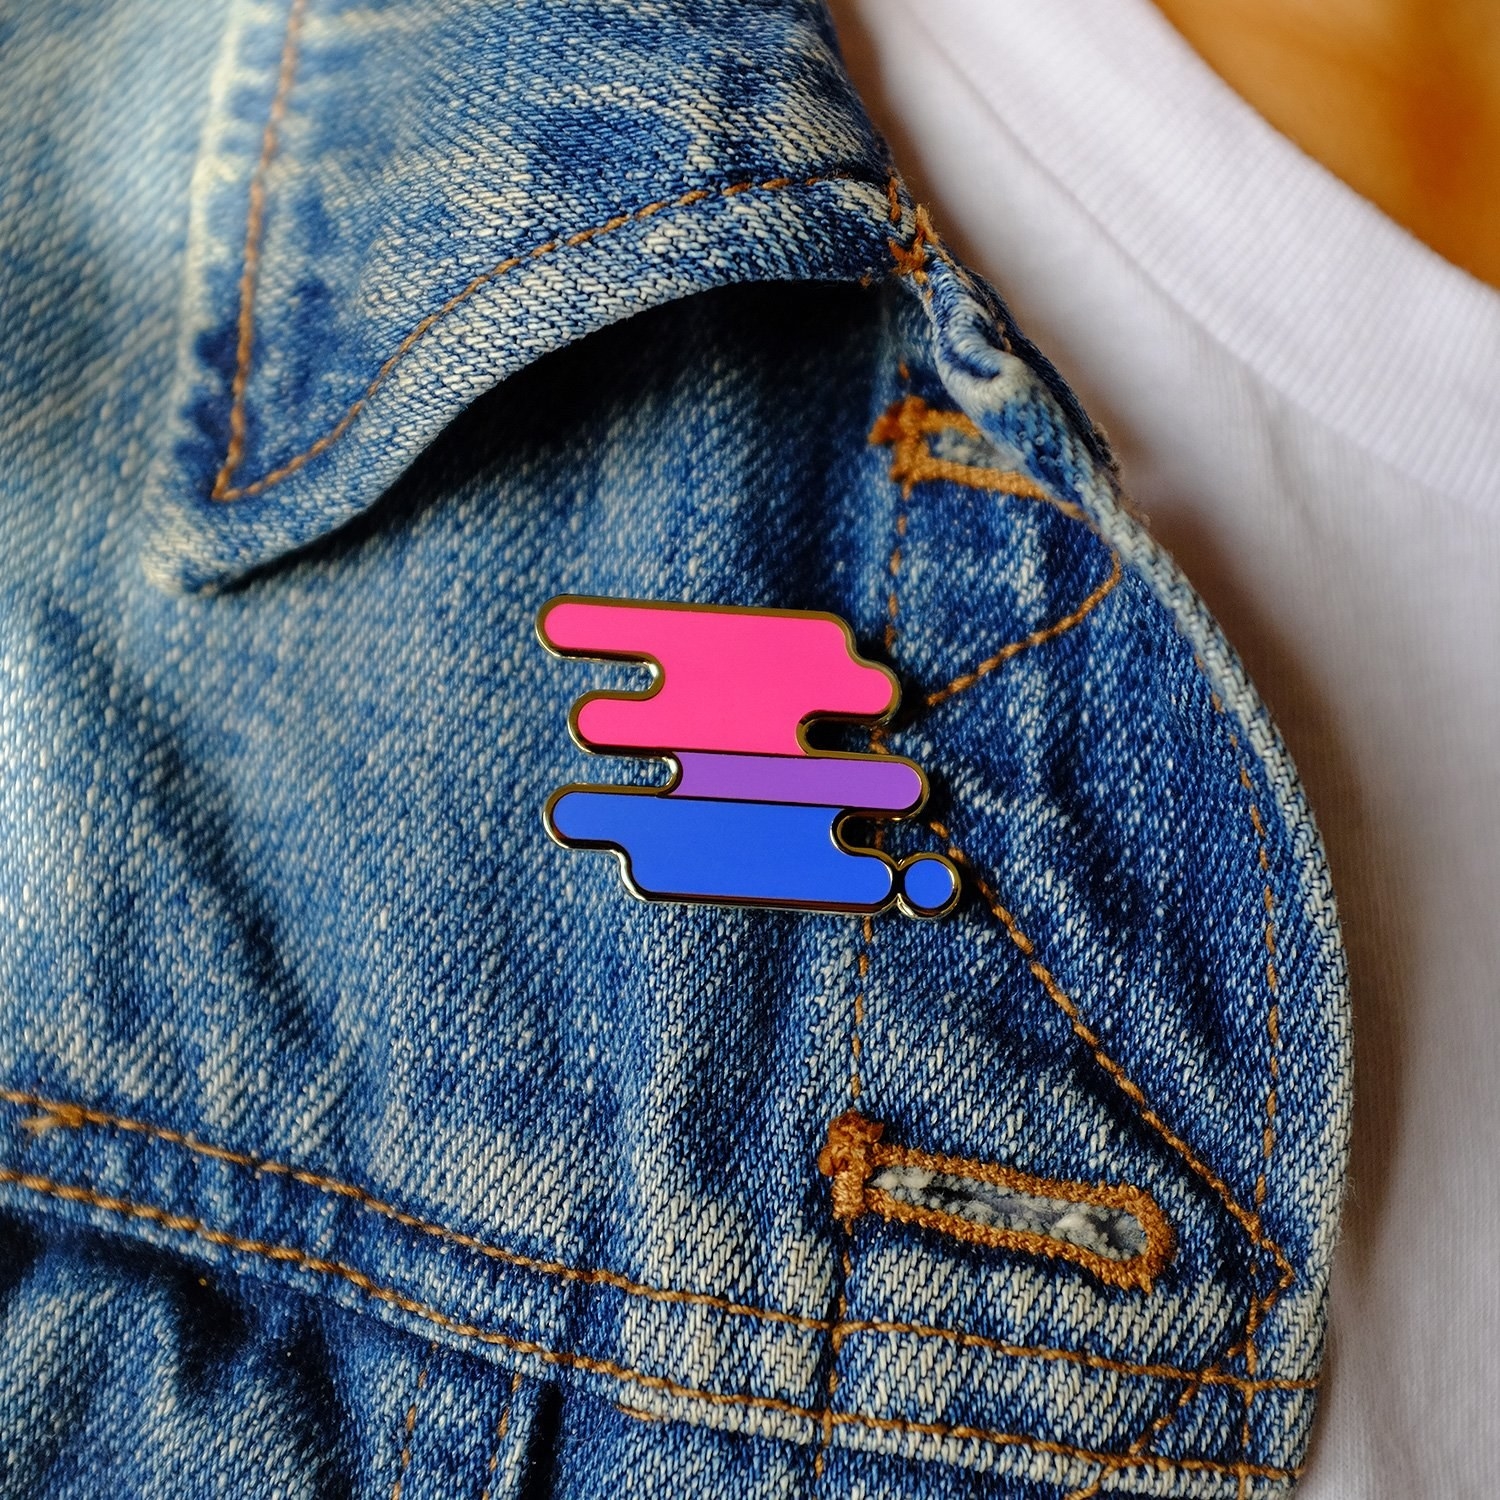 A bisexual pride pin pinned to a denim jacket